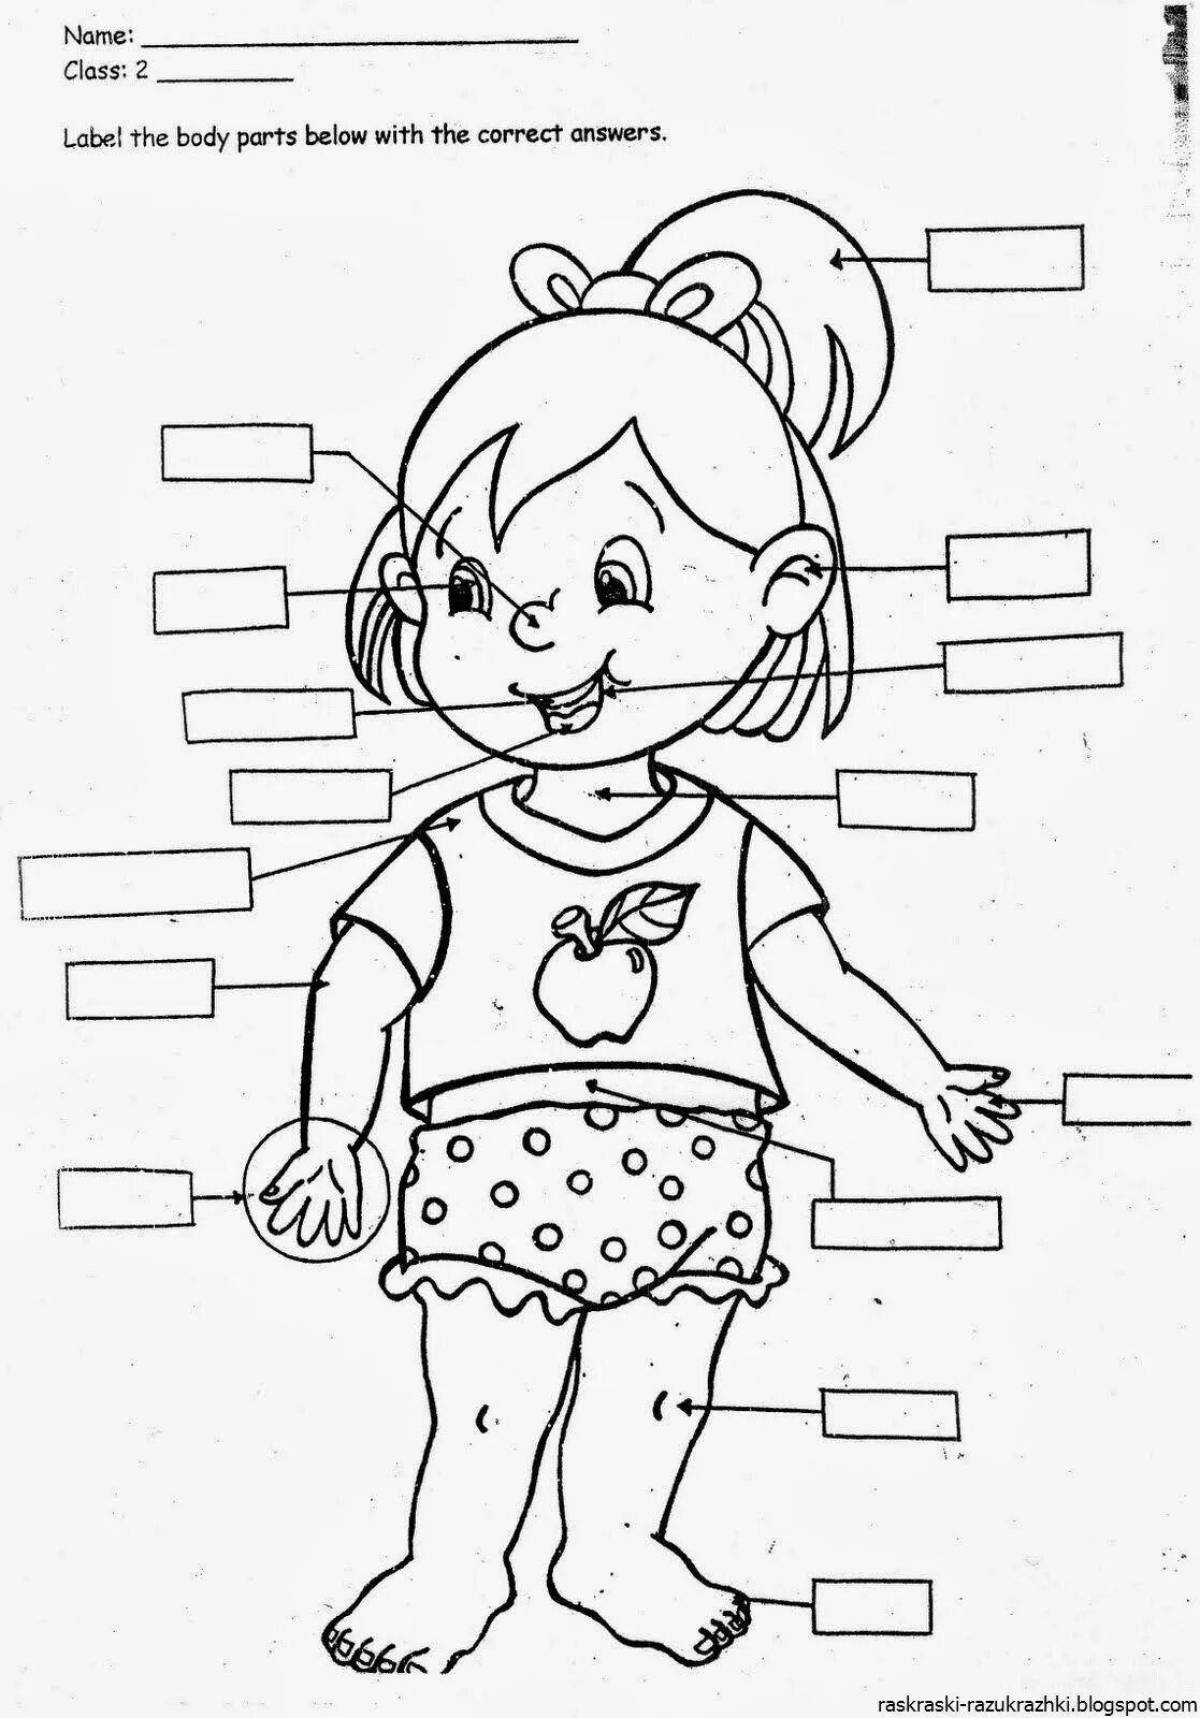 Fun coloring of human body part for kids